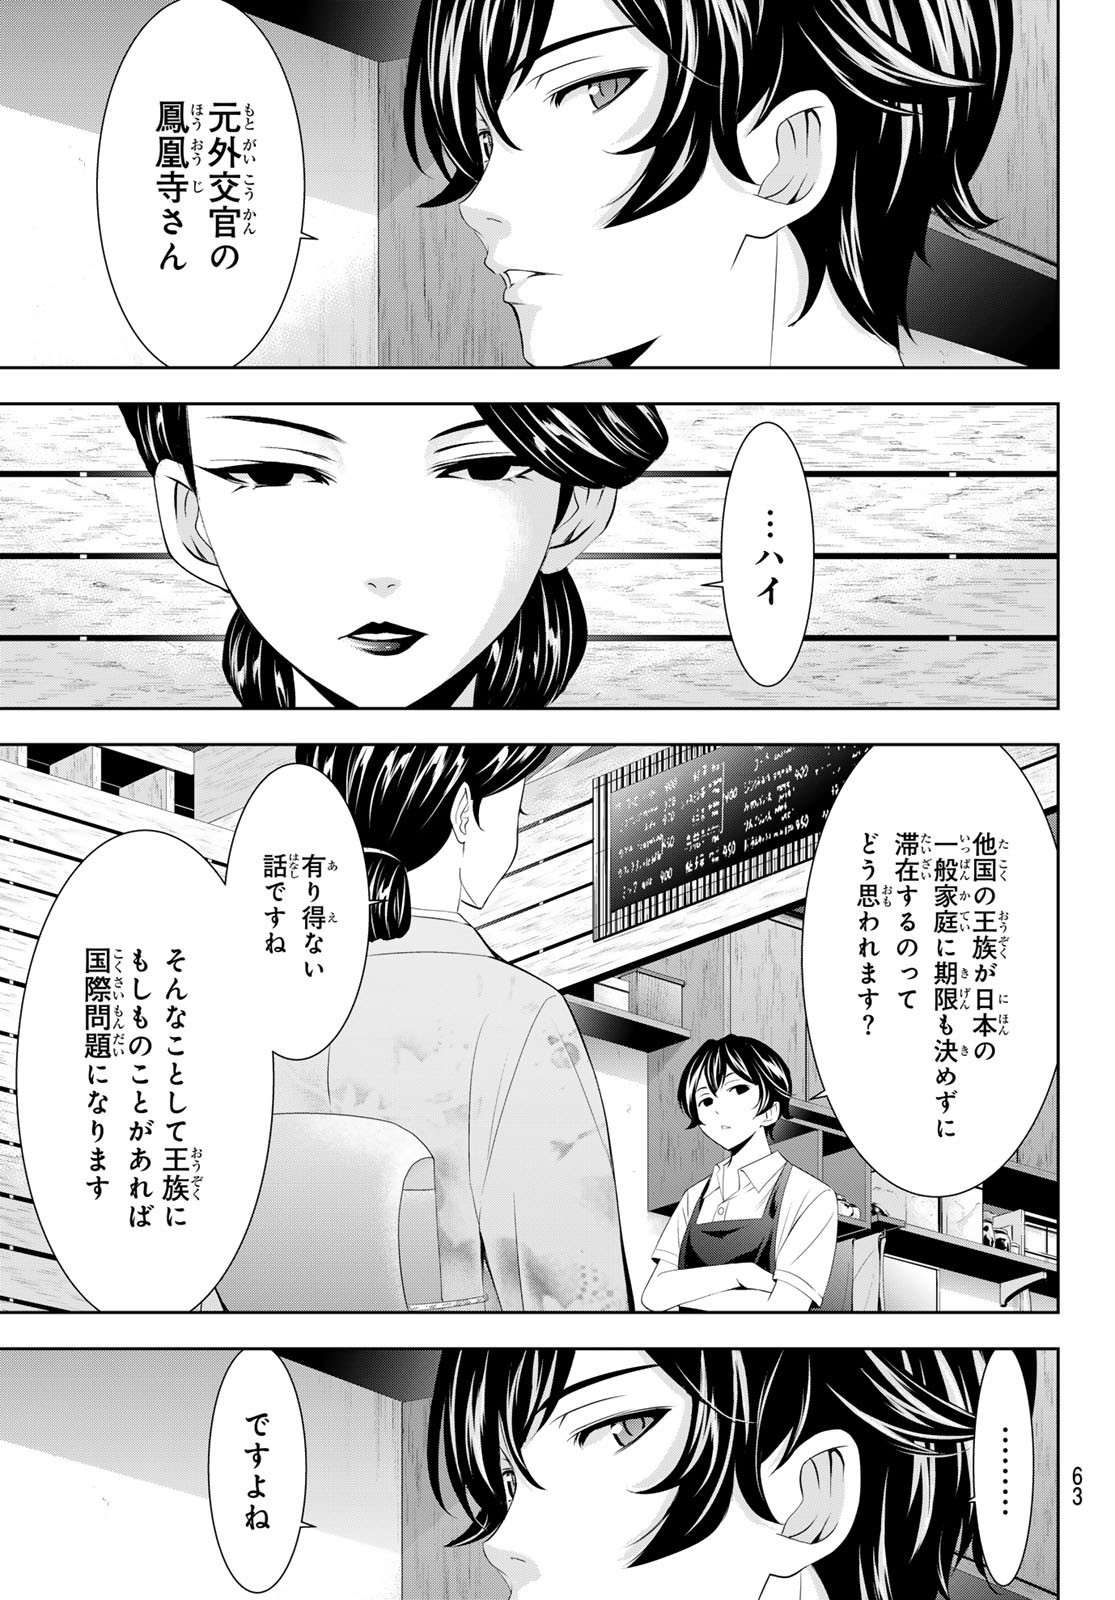 Goddess-Cafe-Terrace - Chapter 137 - Page 3